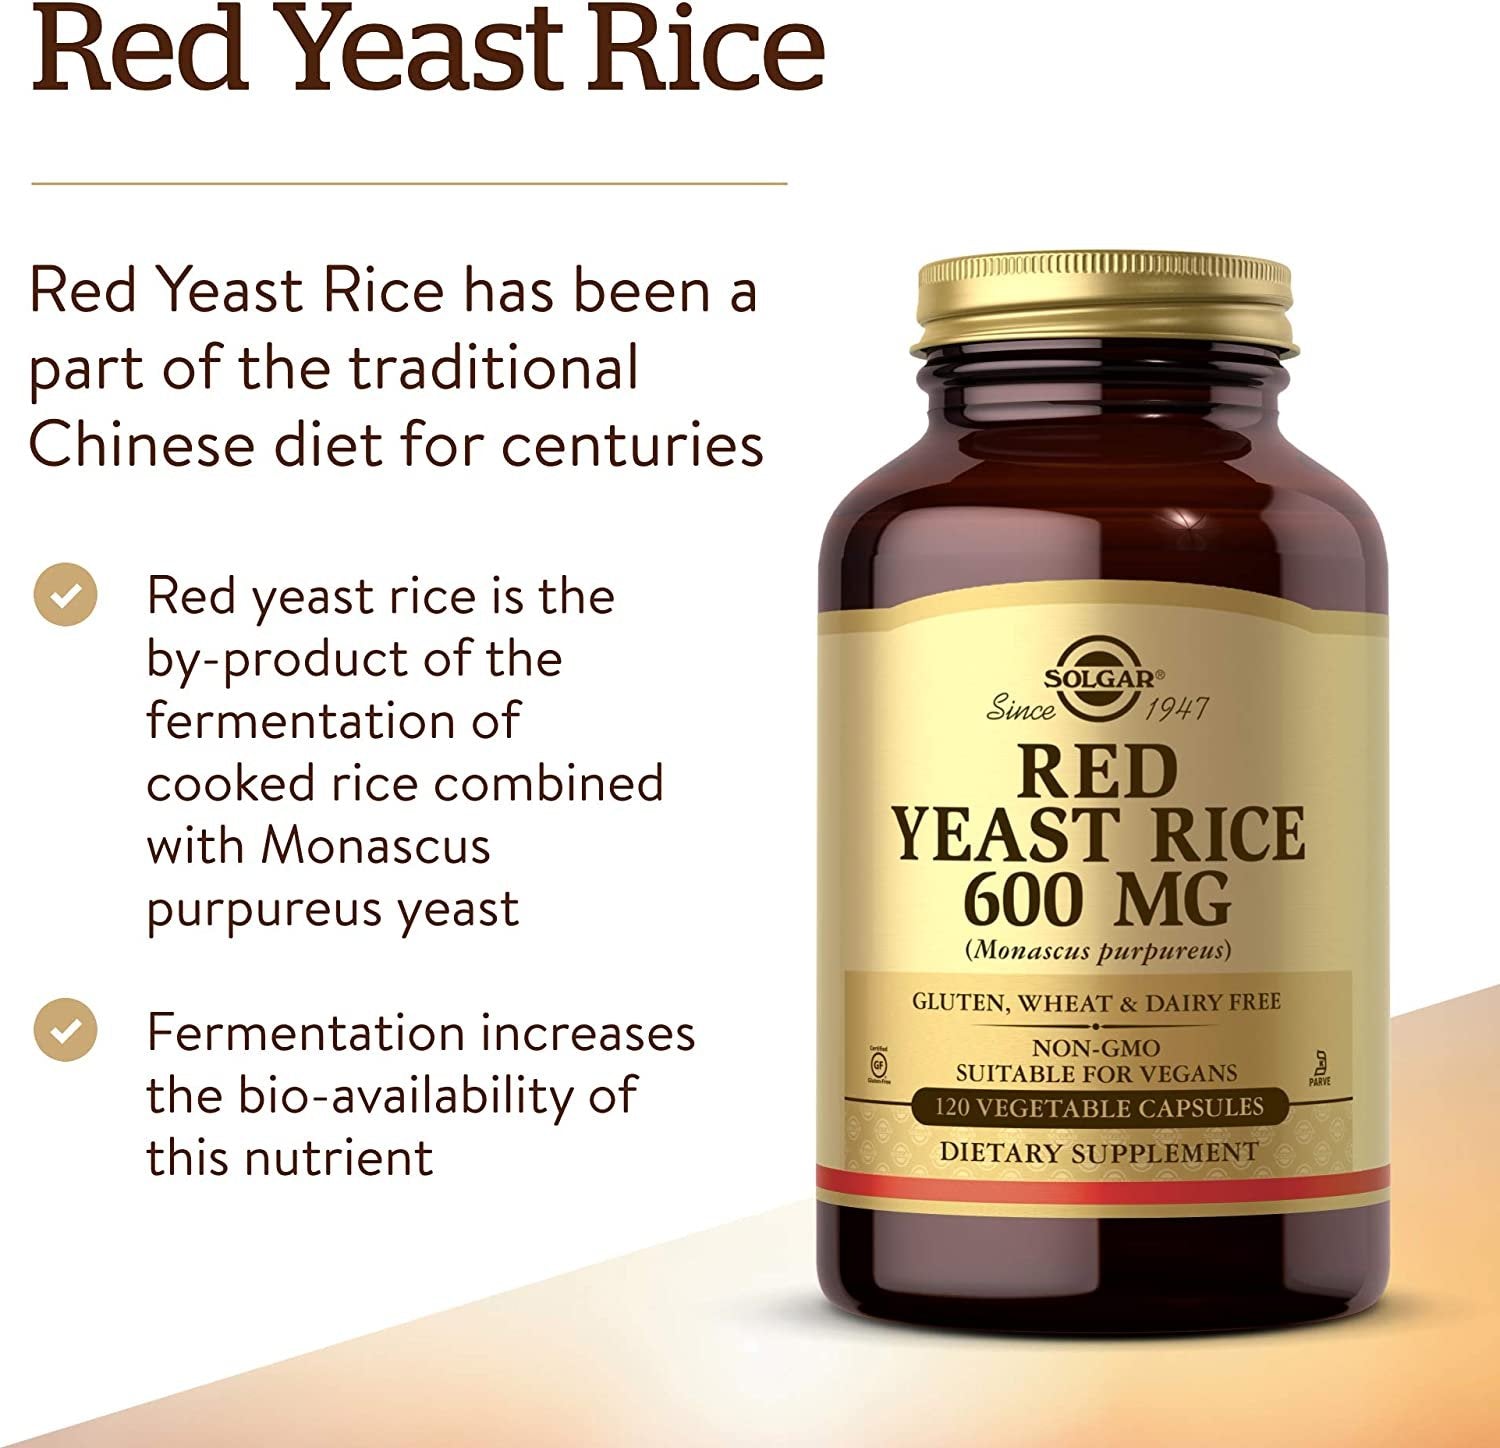 Solgar Red Yeast Rice 600 mg, 120 Vegetable Capsules - Supports Heart Health - Fermented to Increase Bioavailability - Non-GMO, Vegan, Gluten Free, Dairy Free, Kosher - 60 Servings